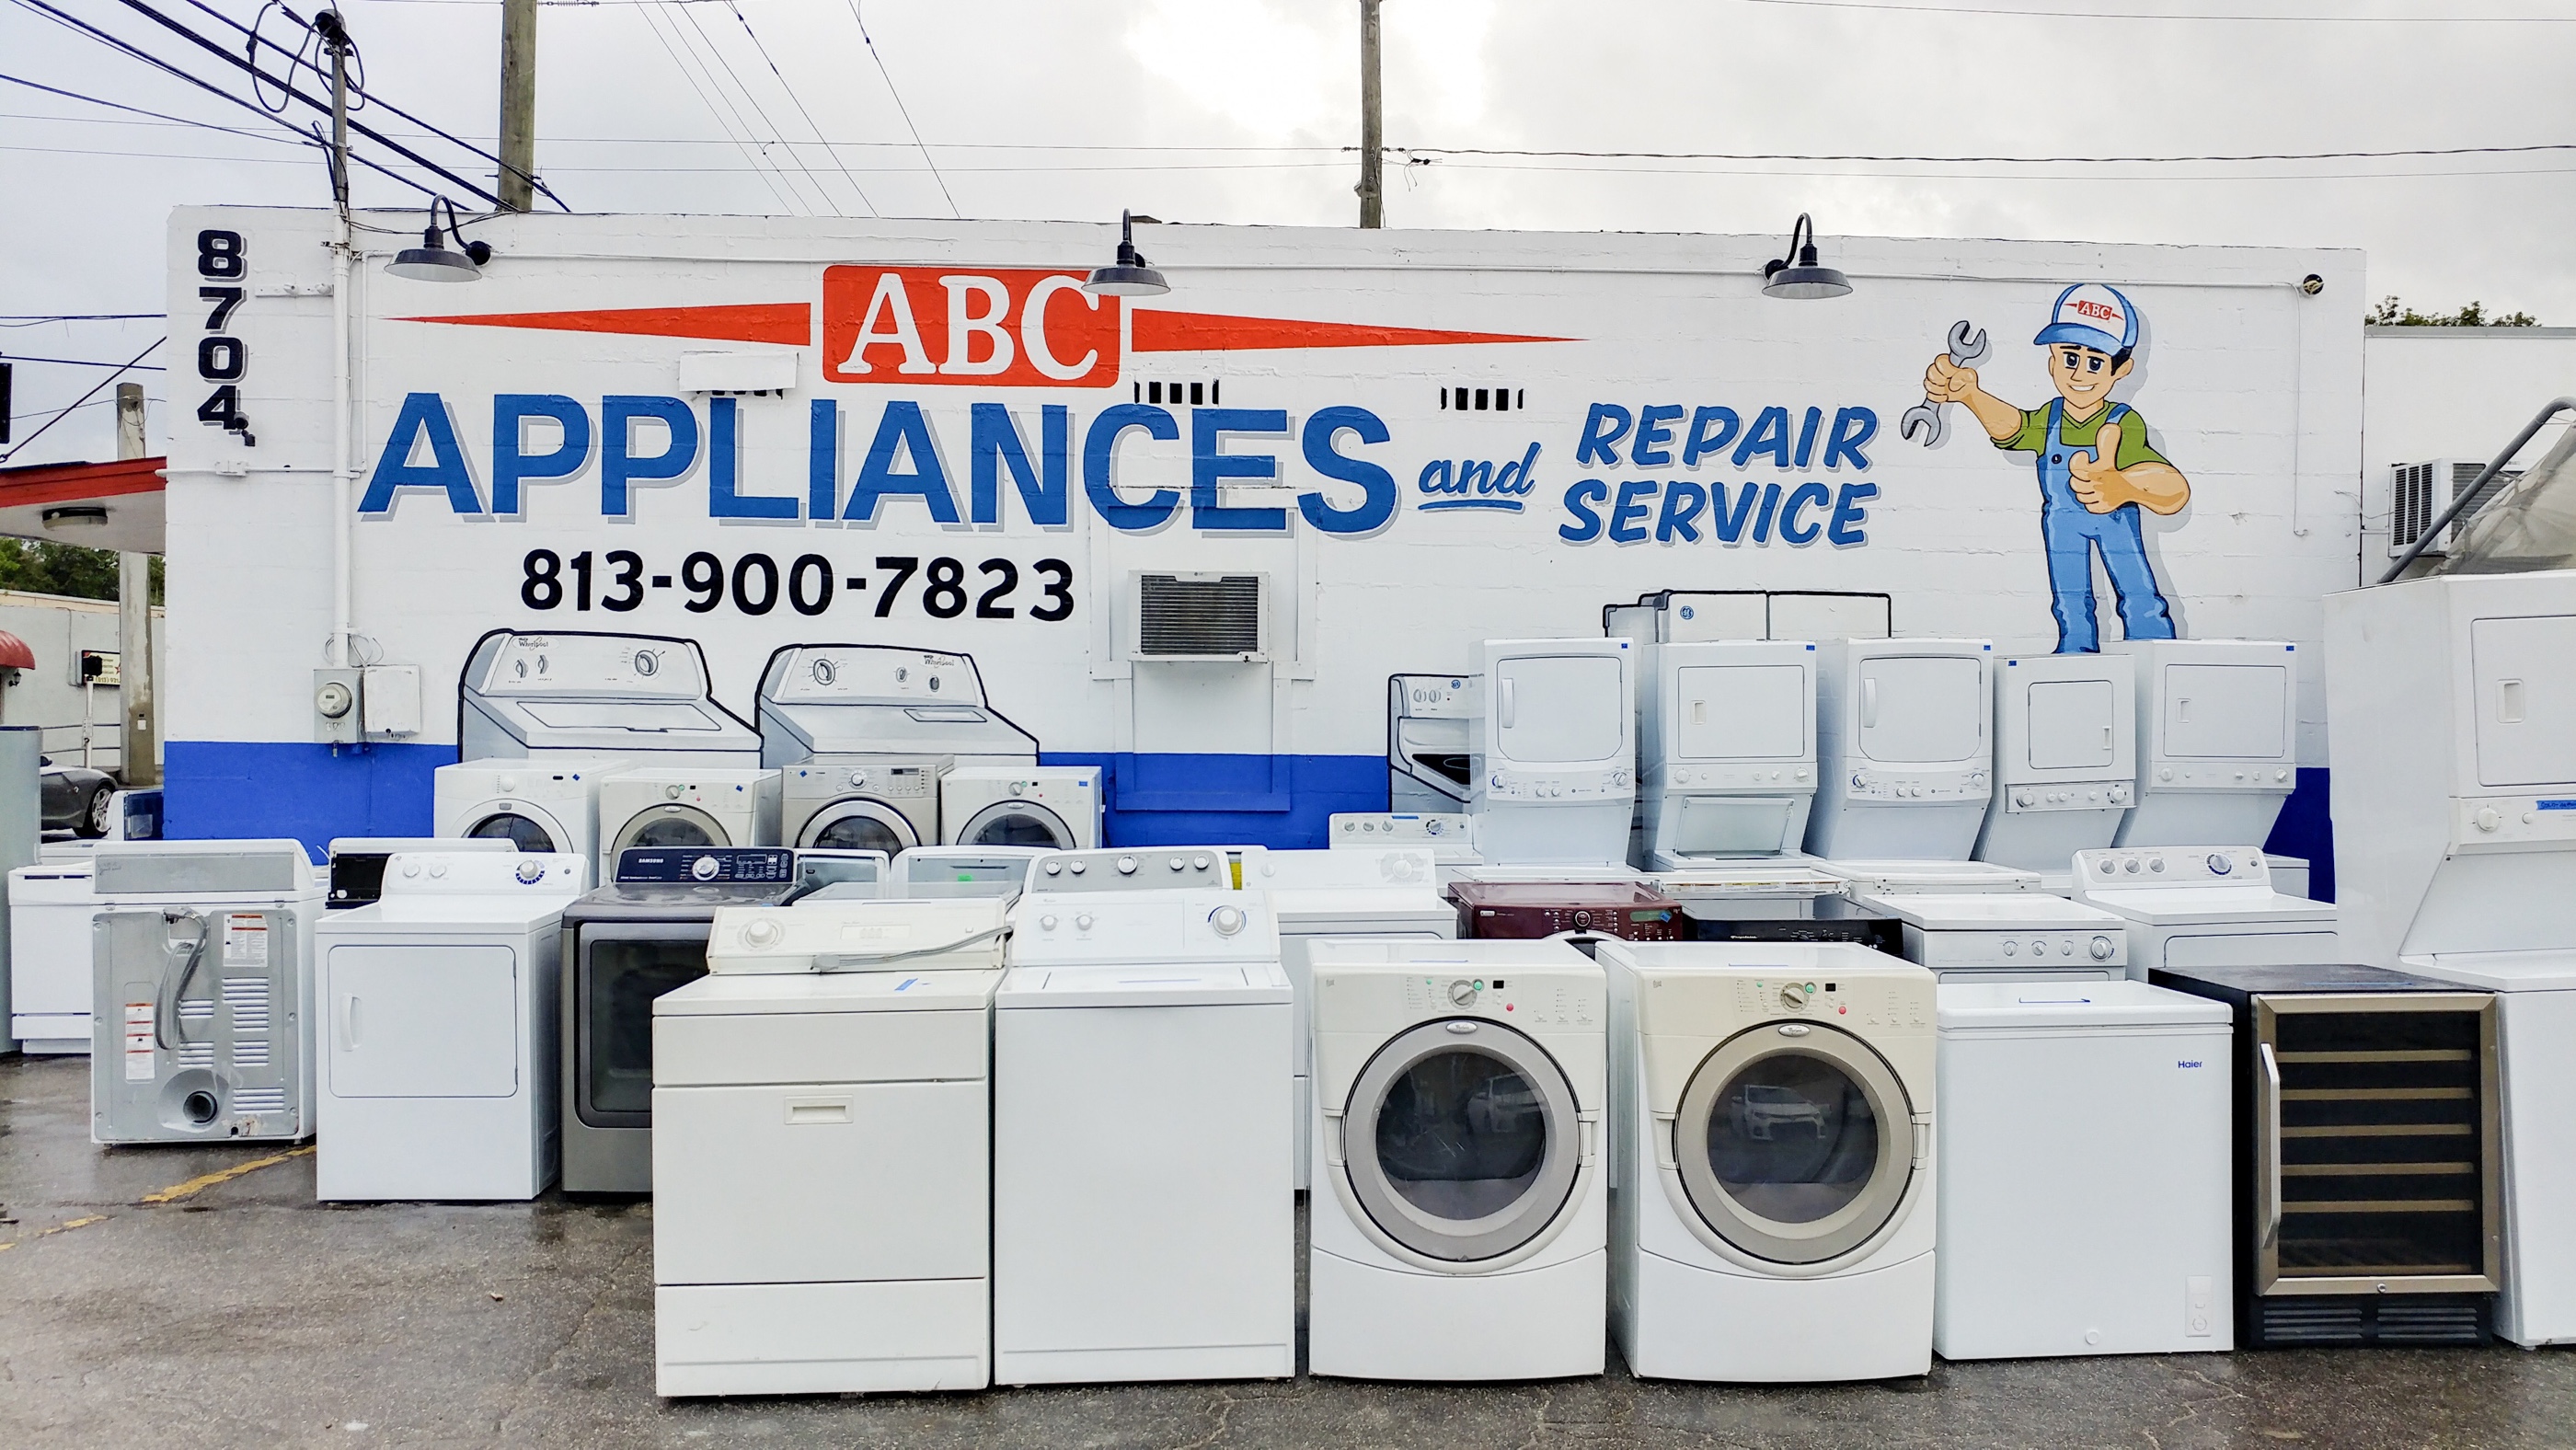 ABC Used Appliances in Tampa, FL.